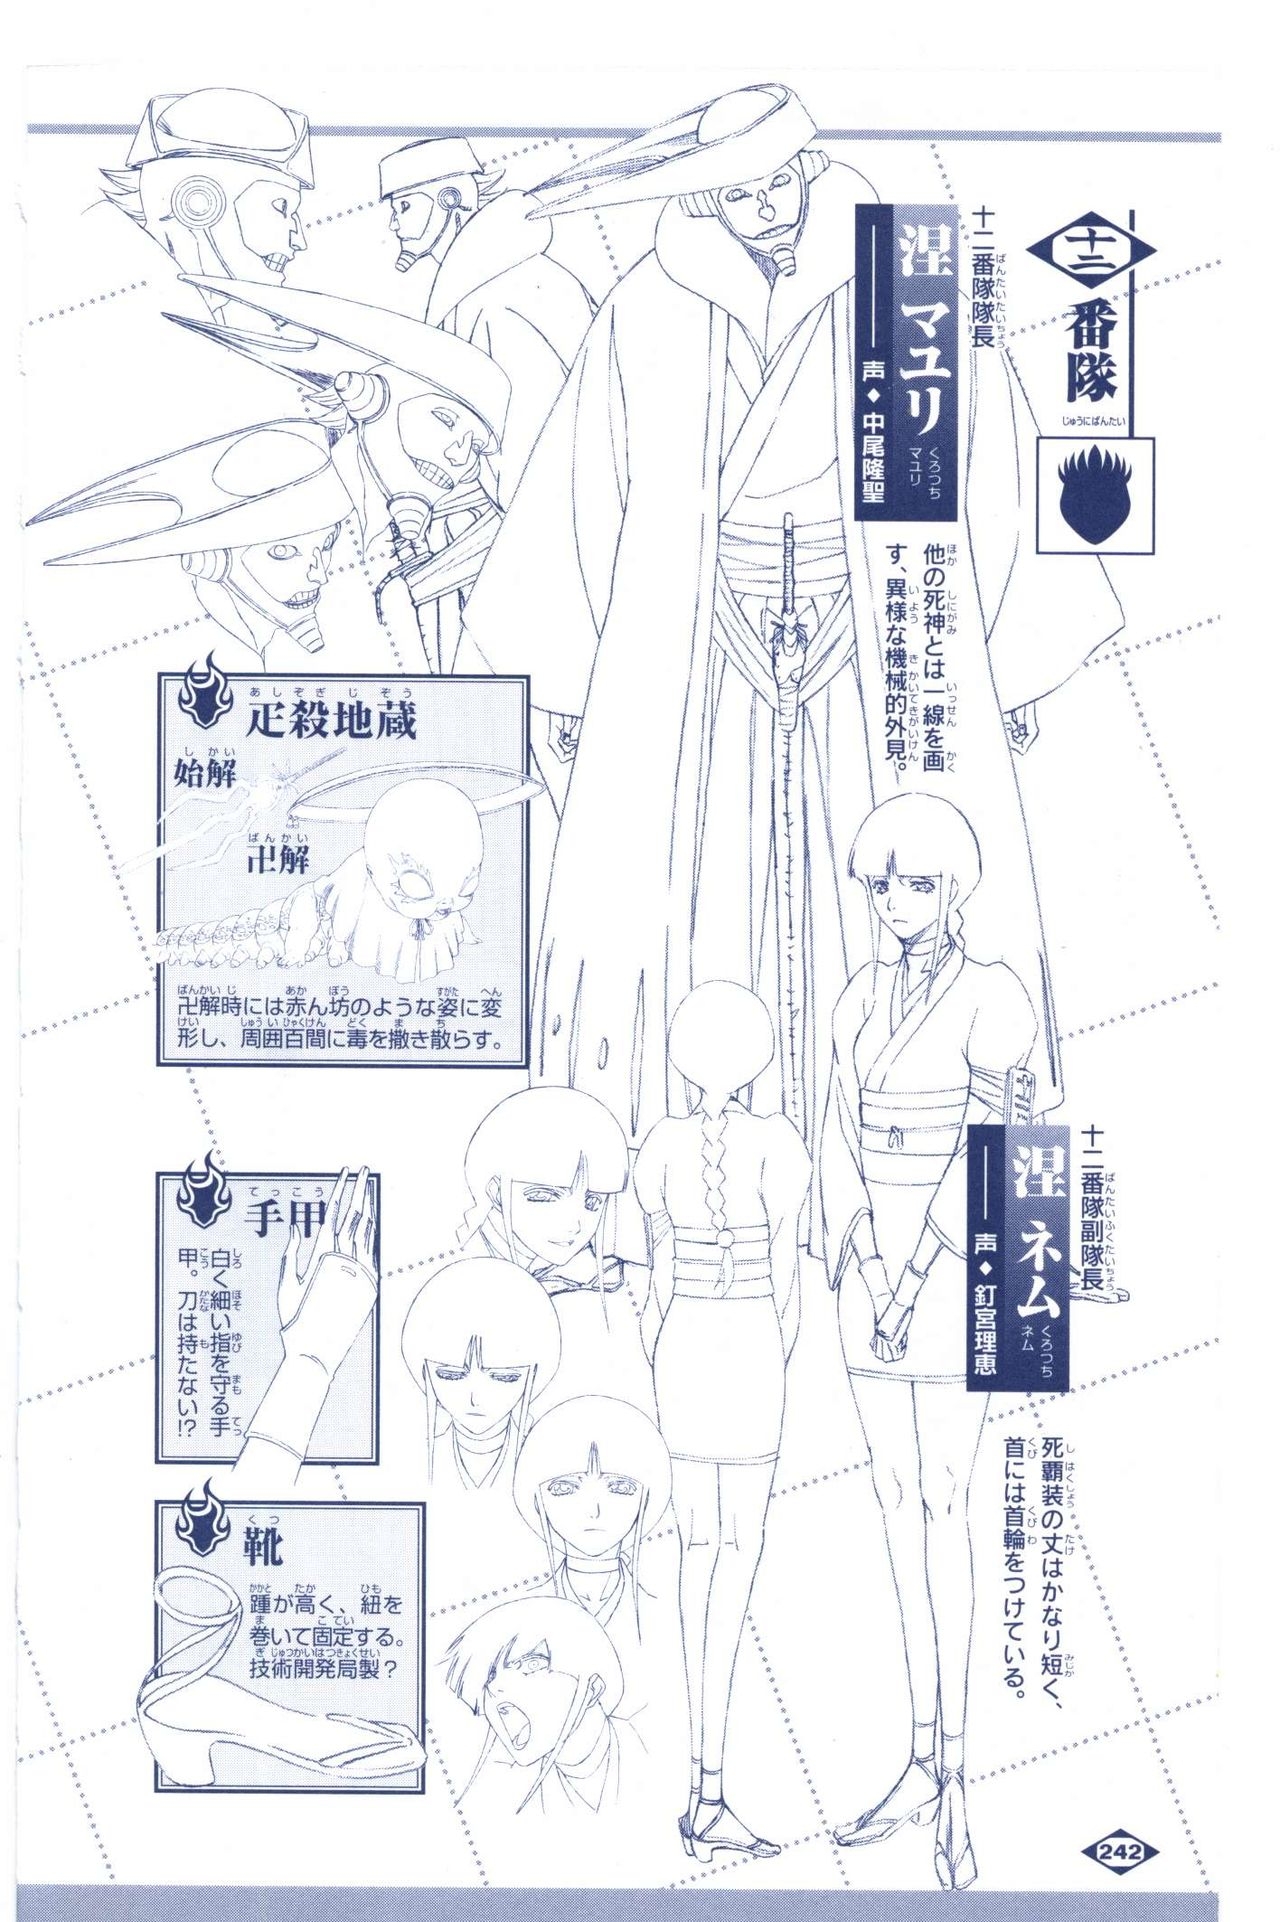 Bleach: Official Animation Book VIBEs 242